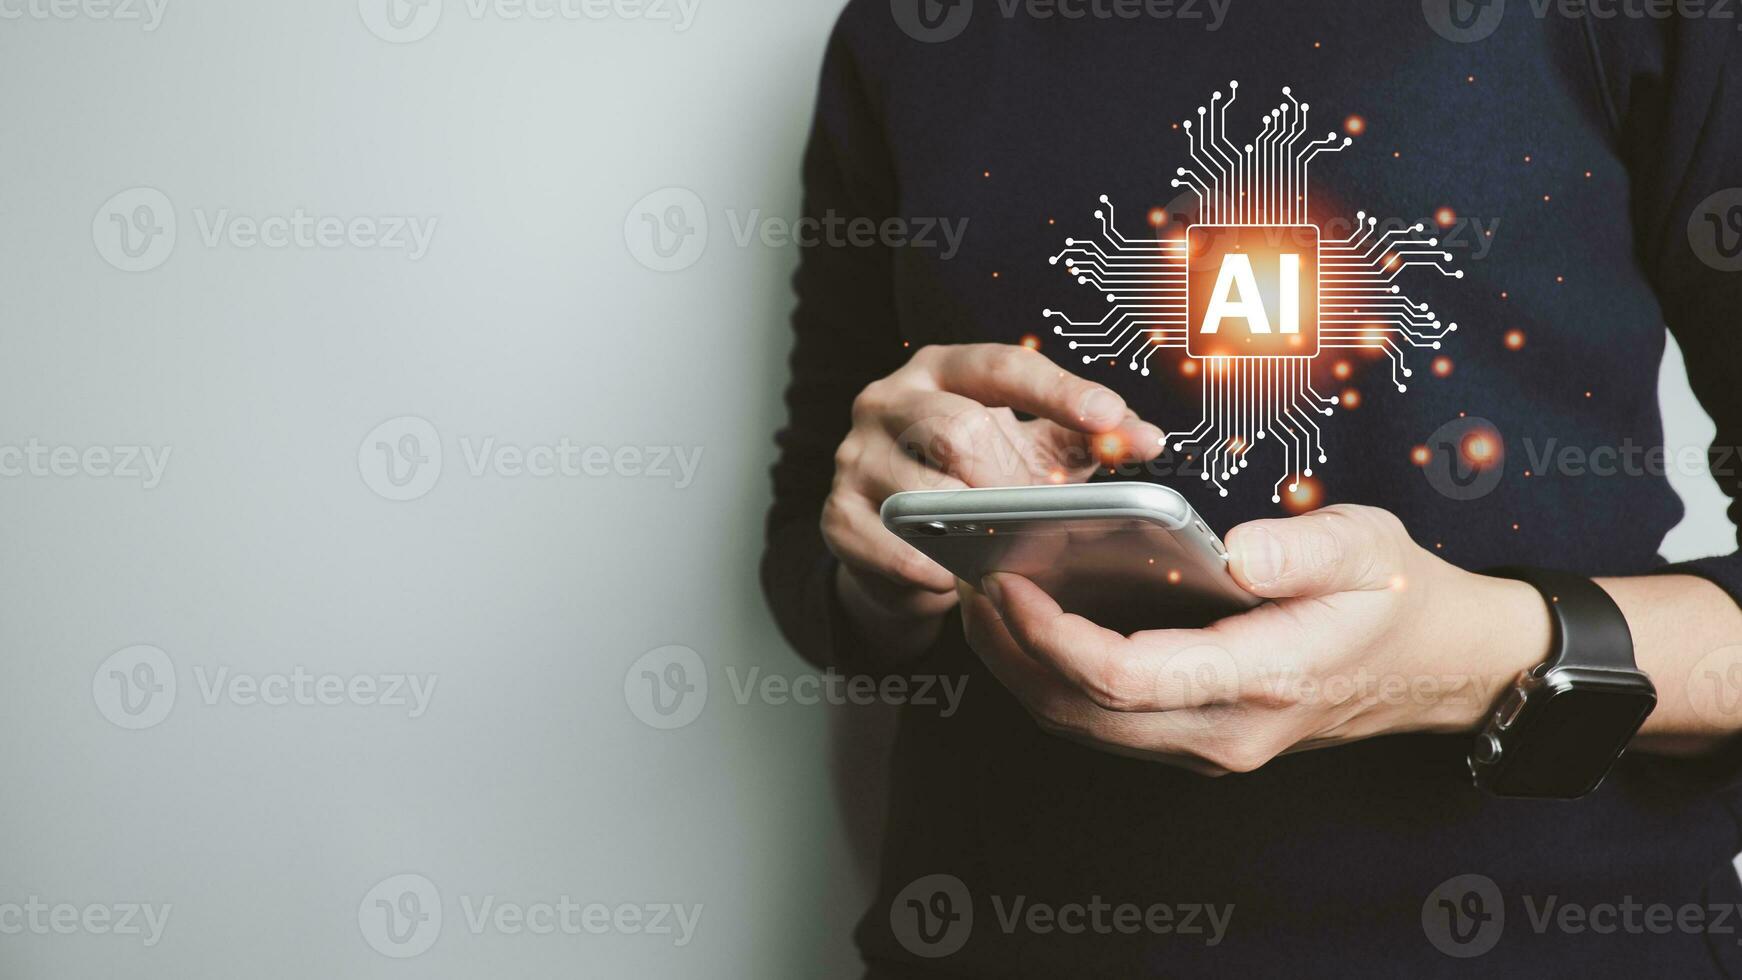 AI, Artificial Intelligence, Concept global data connection with Internet technology, using online transaction with AI by learning machine and big data, database management, cloud computing photo